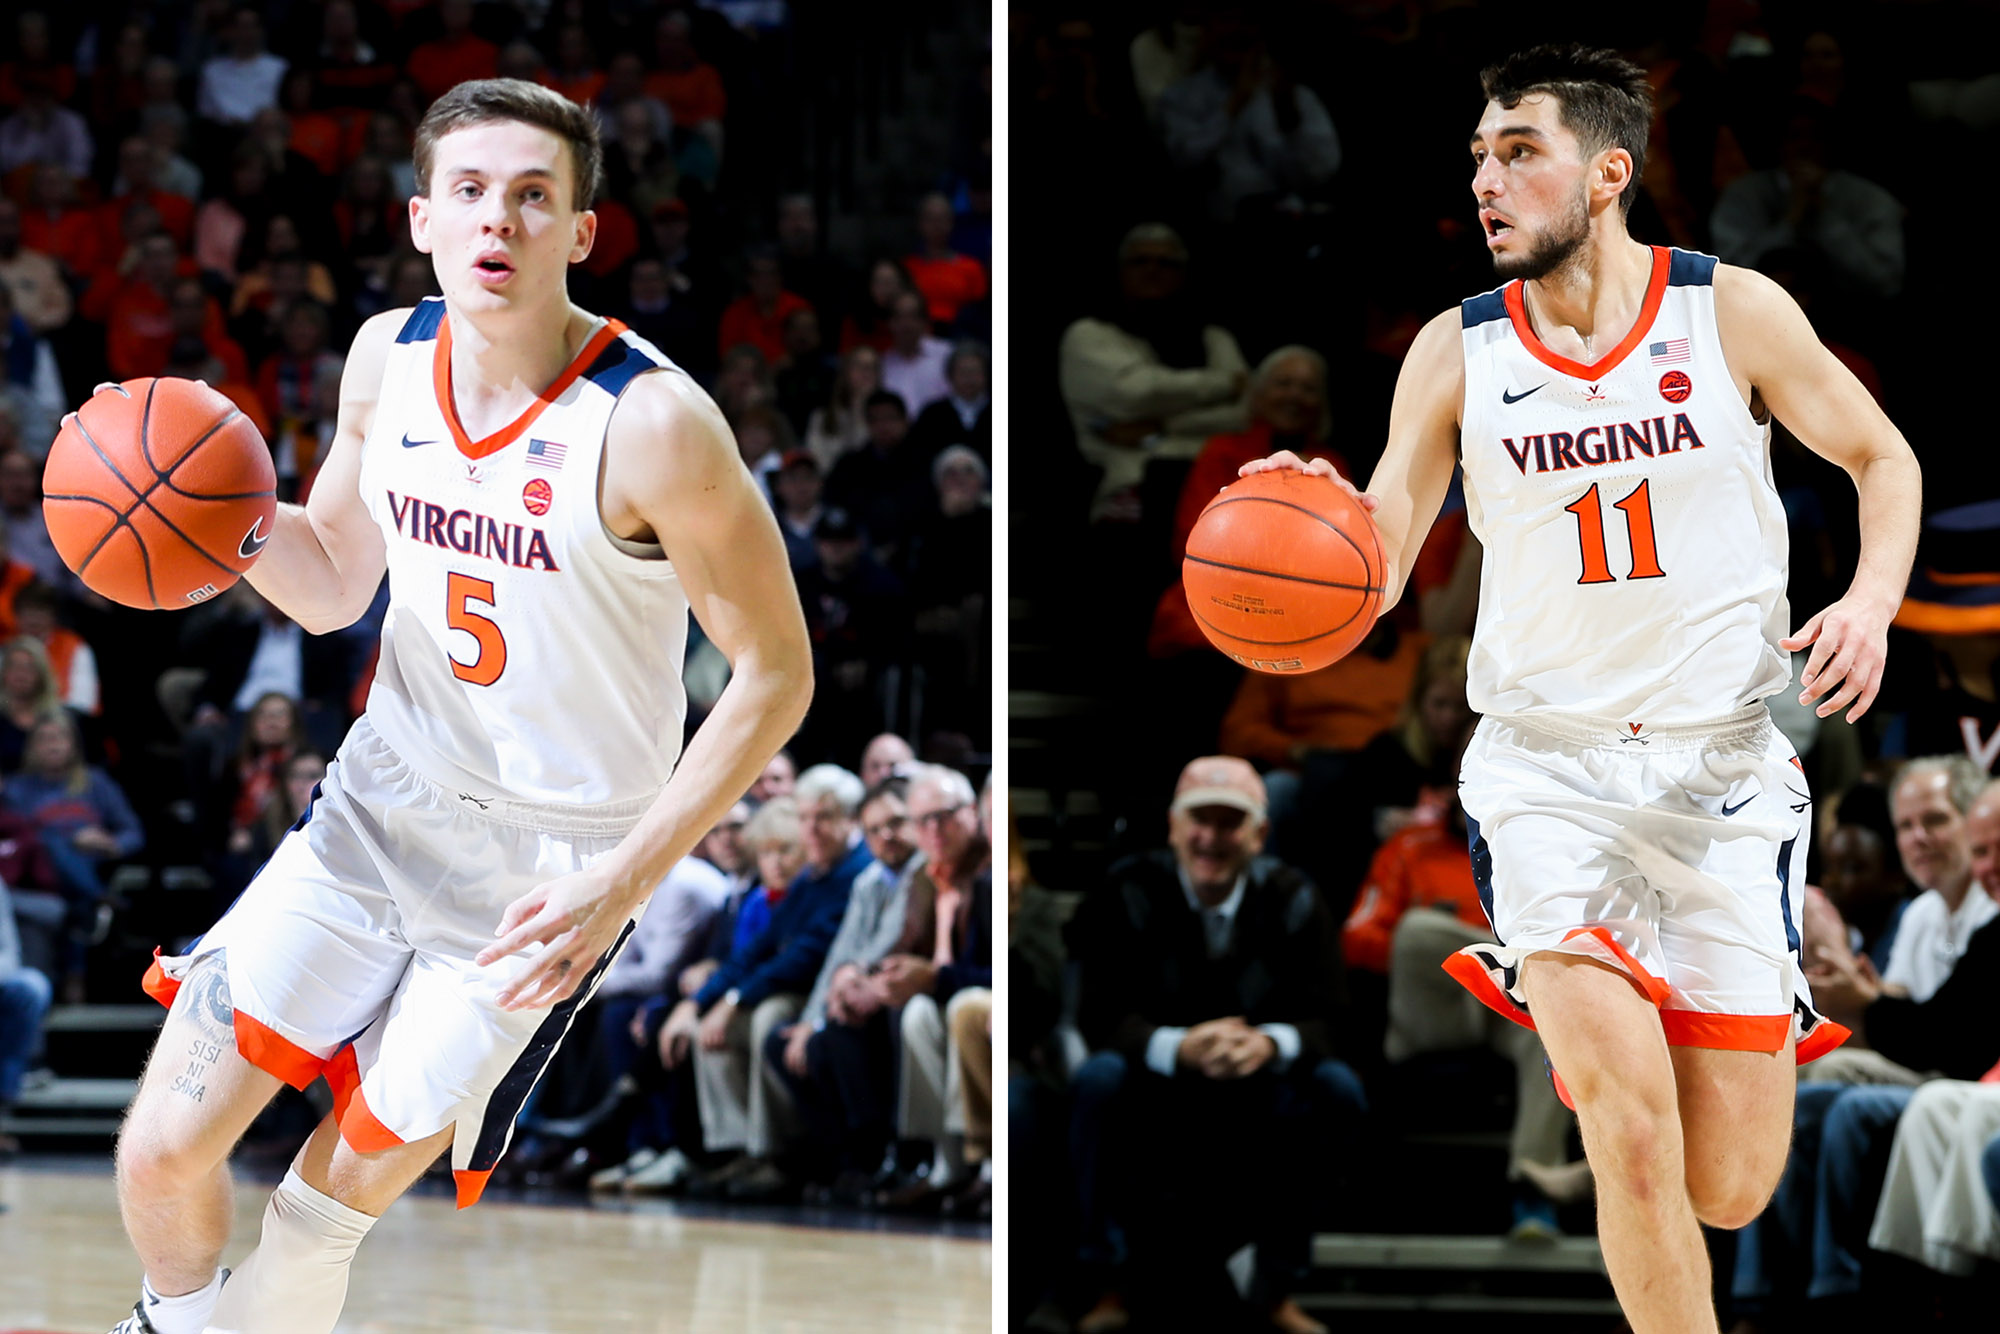 Kyle Guy, left, and Ty Jerome, right, dribbling during a game